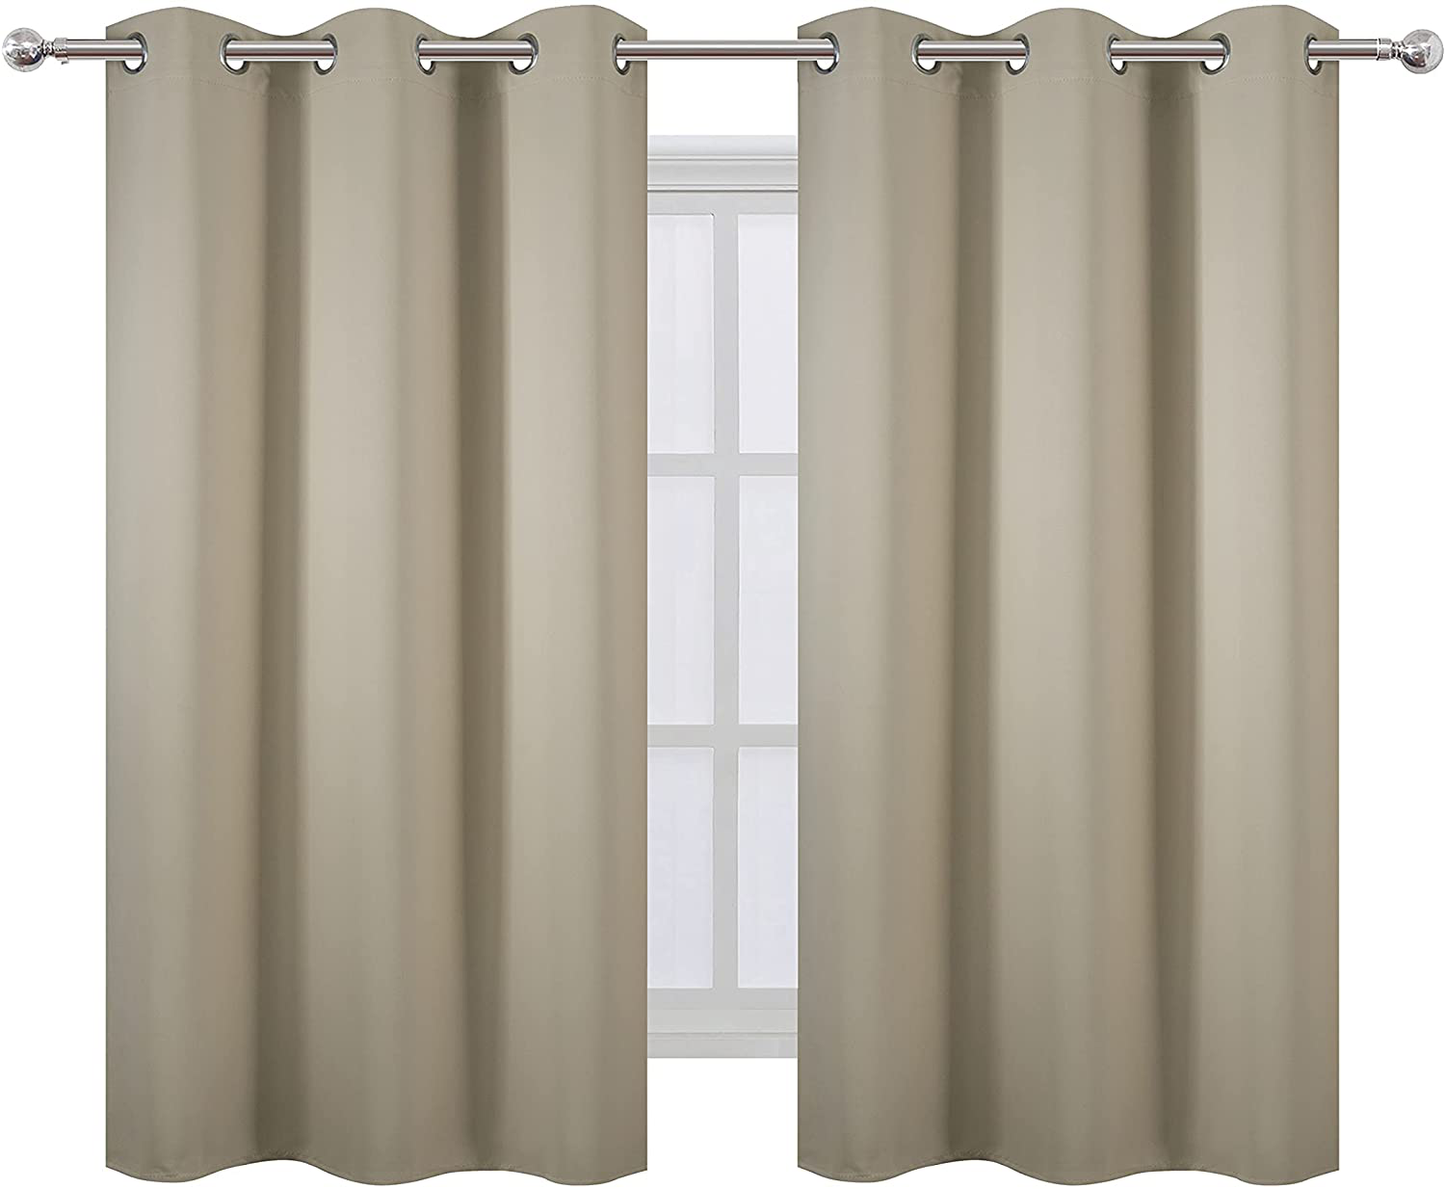 LEMOMO Olive Green Thermal Blackout Curtains/52 x 72 Inch/Set of 2 Panels Room Darkening Curtains for Bedroom